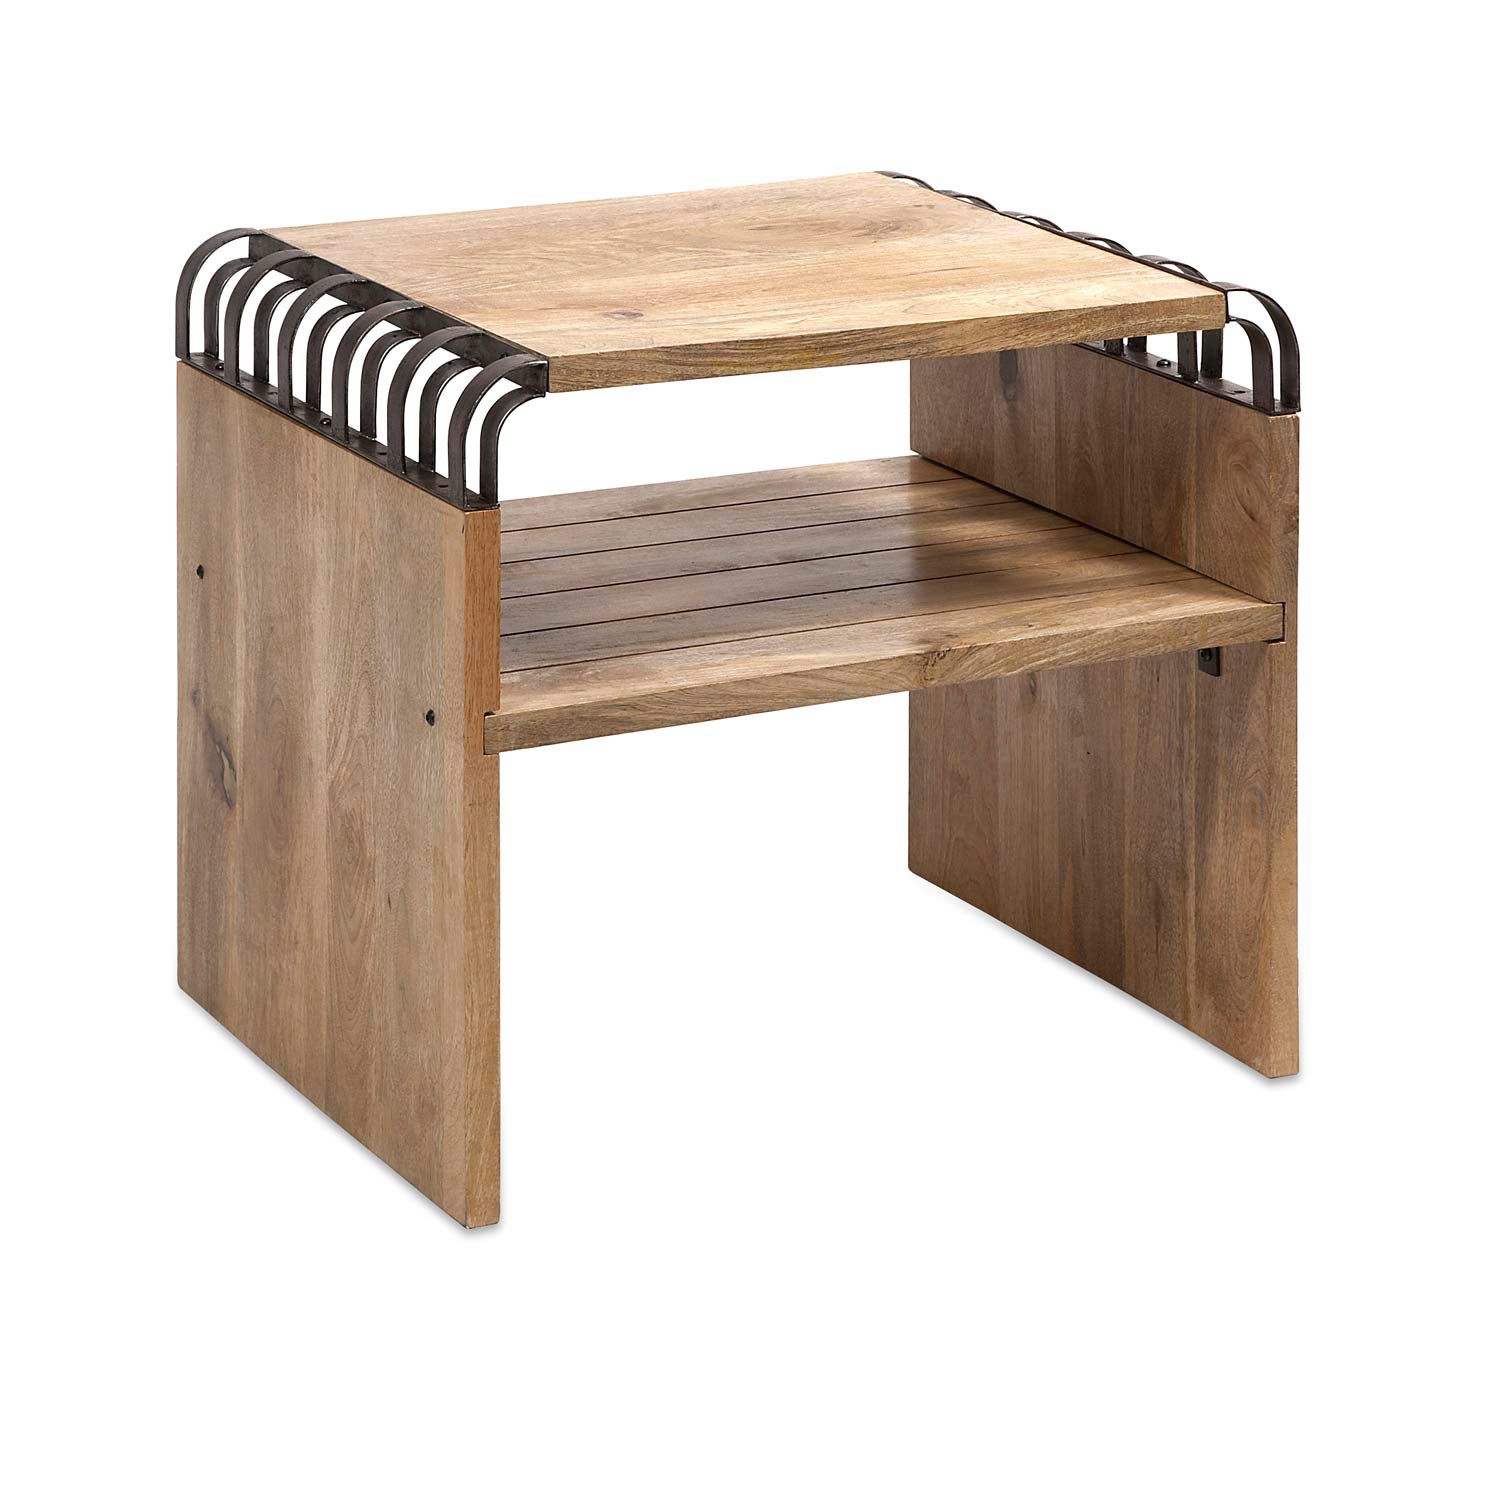 IMAX Conwell Mango Wood End Table